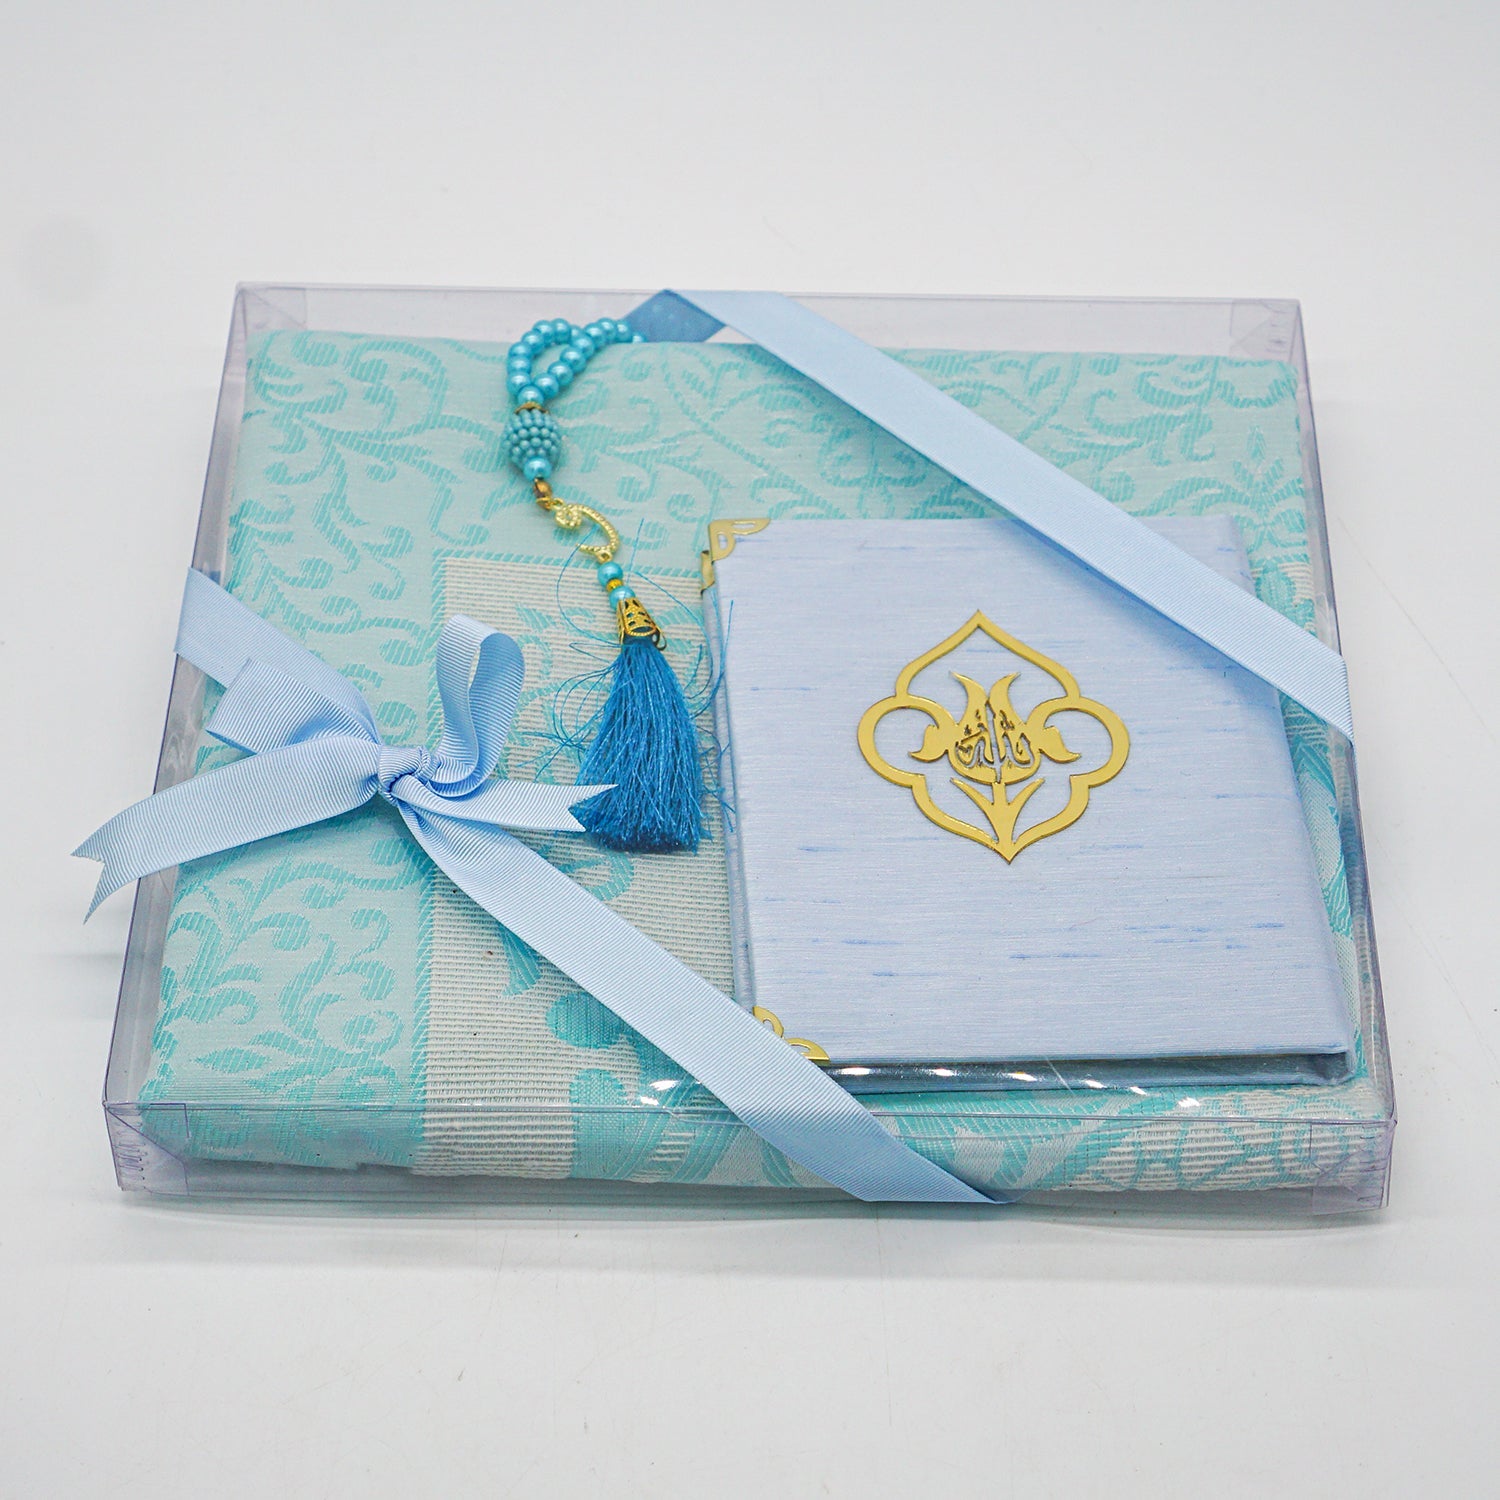 Prayer Mat Gift Set With Prayer Beads and Surah Book - A Beautiful Gift for Any Occasion-almanaar Islamic Store